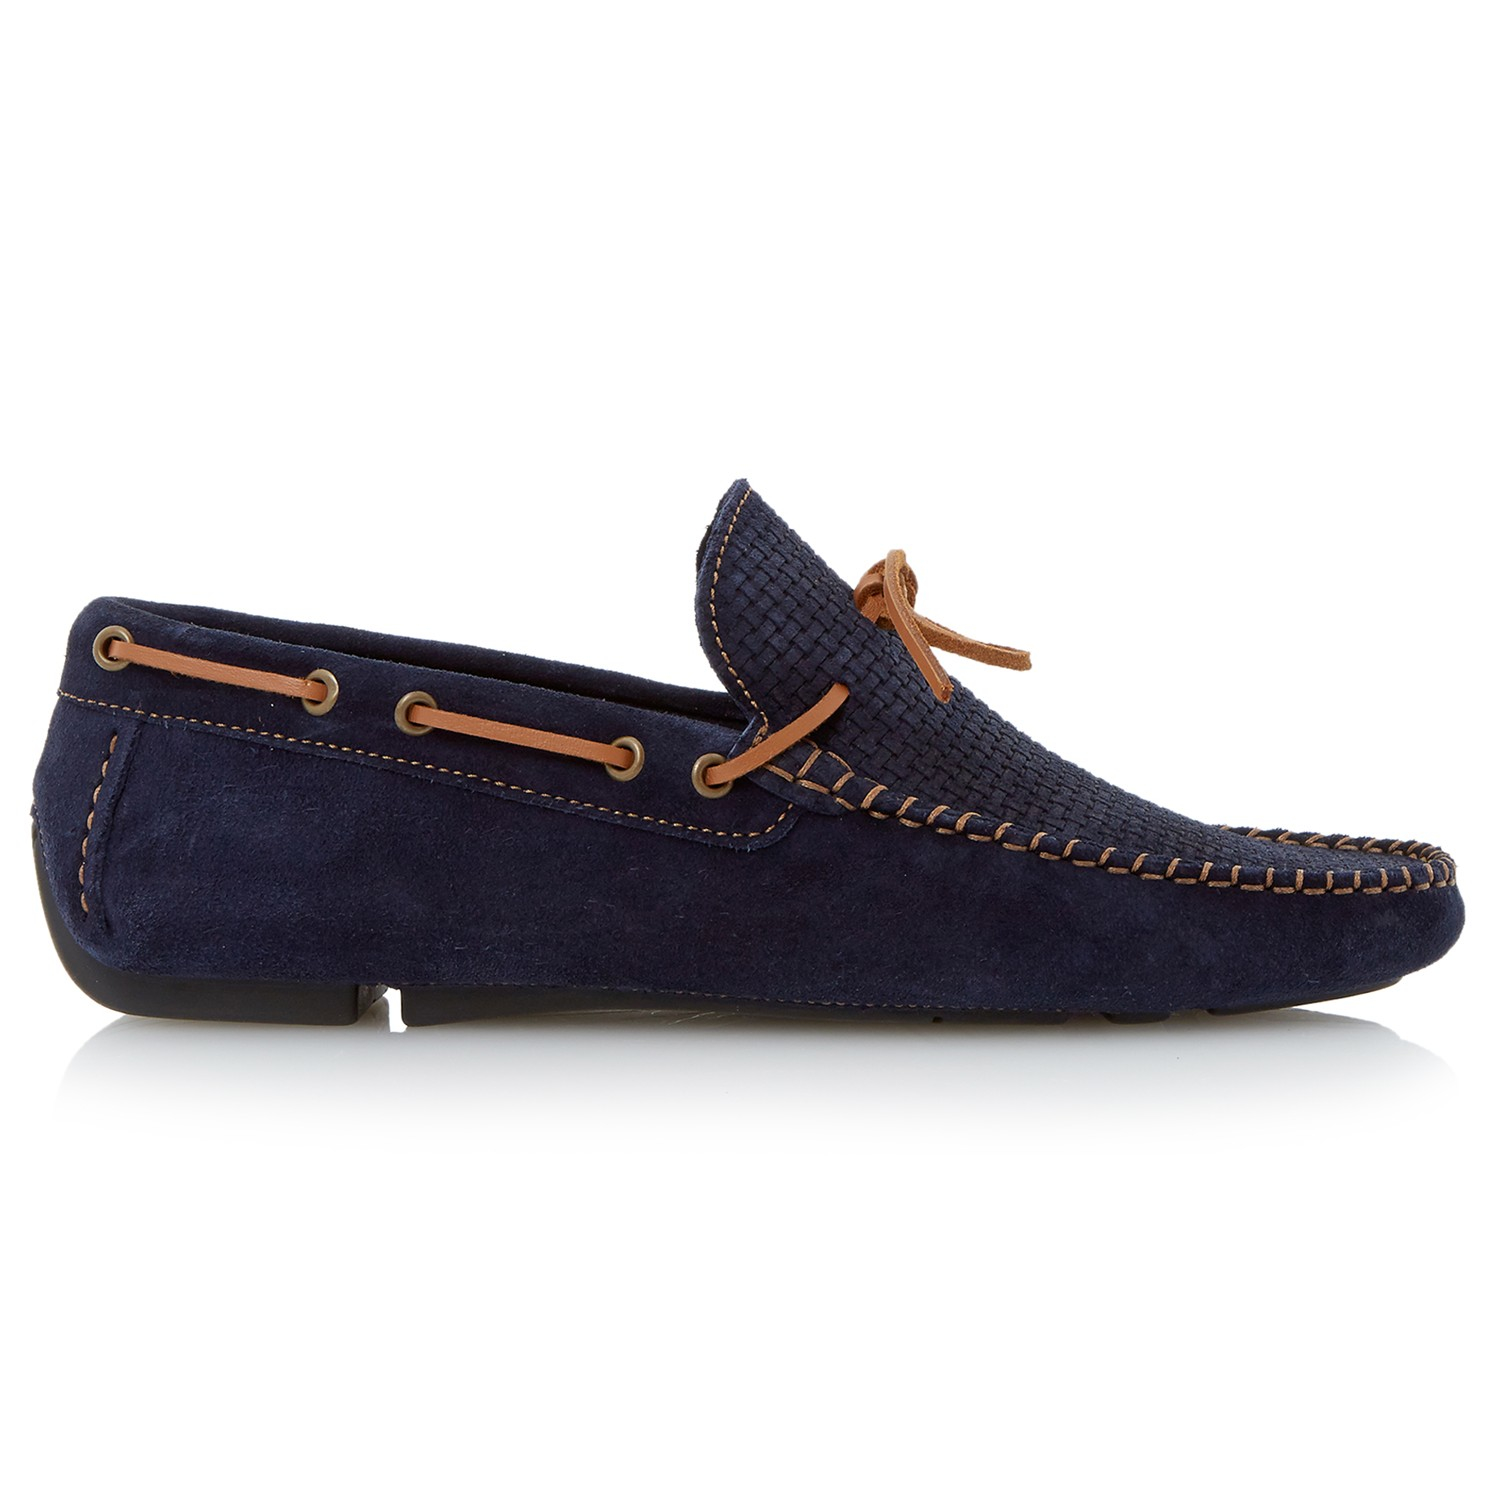  Dune  Beachcomber Suede Driving Shoes  Lyst